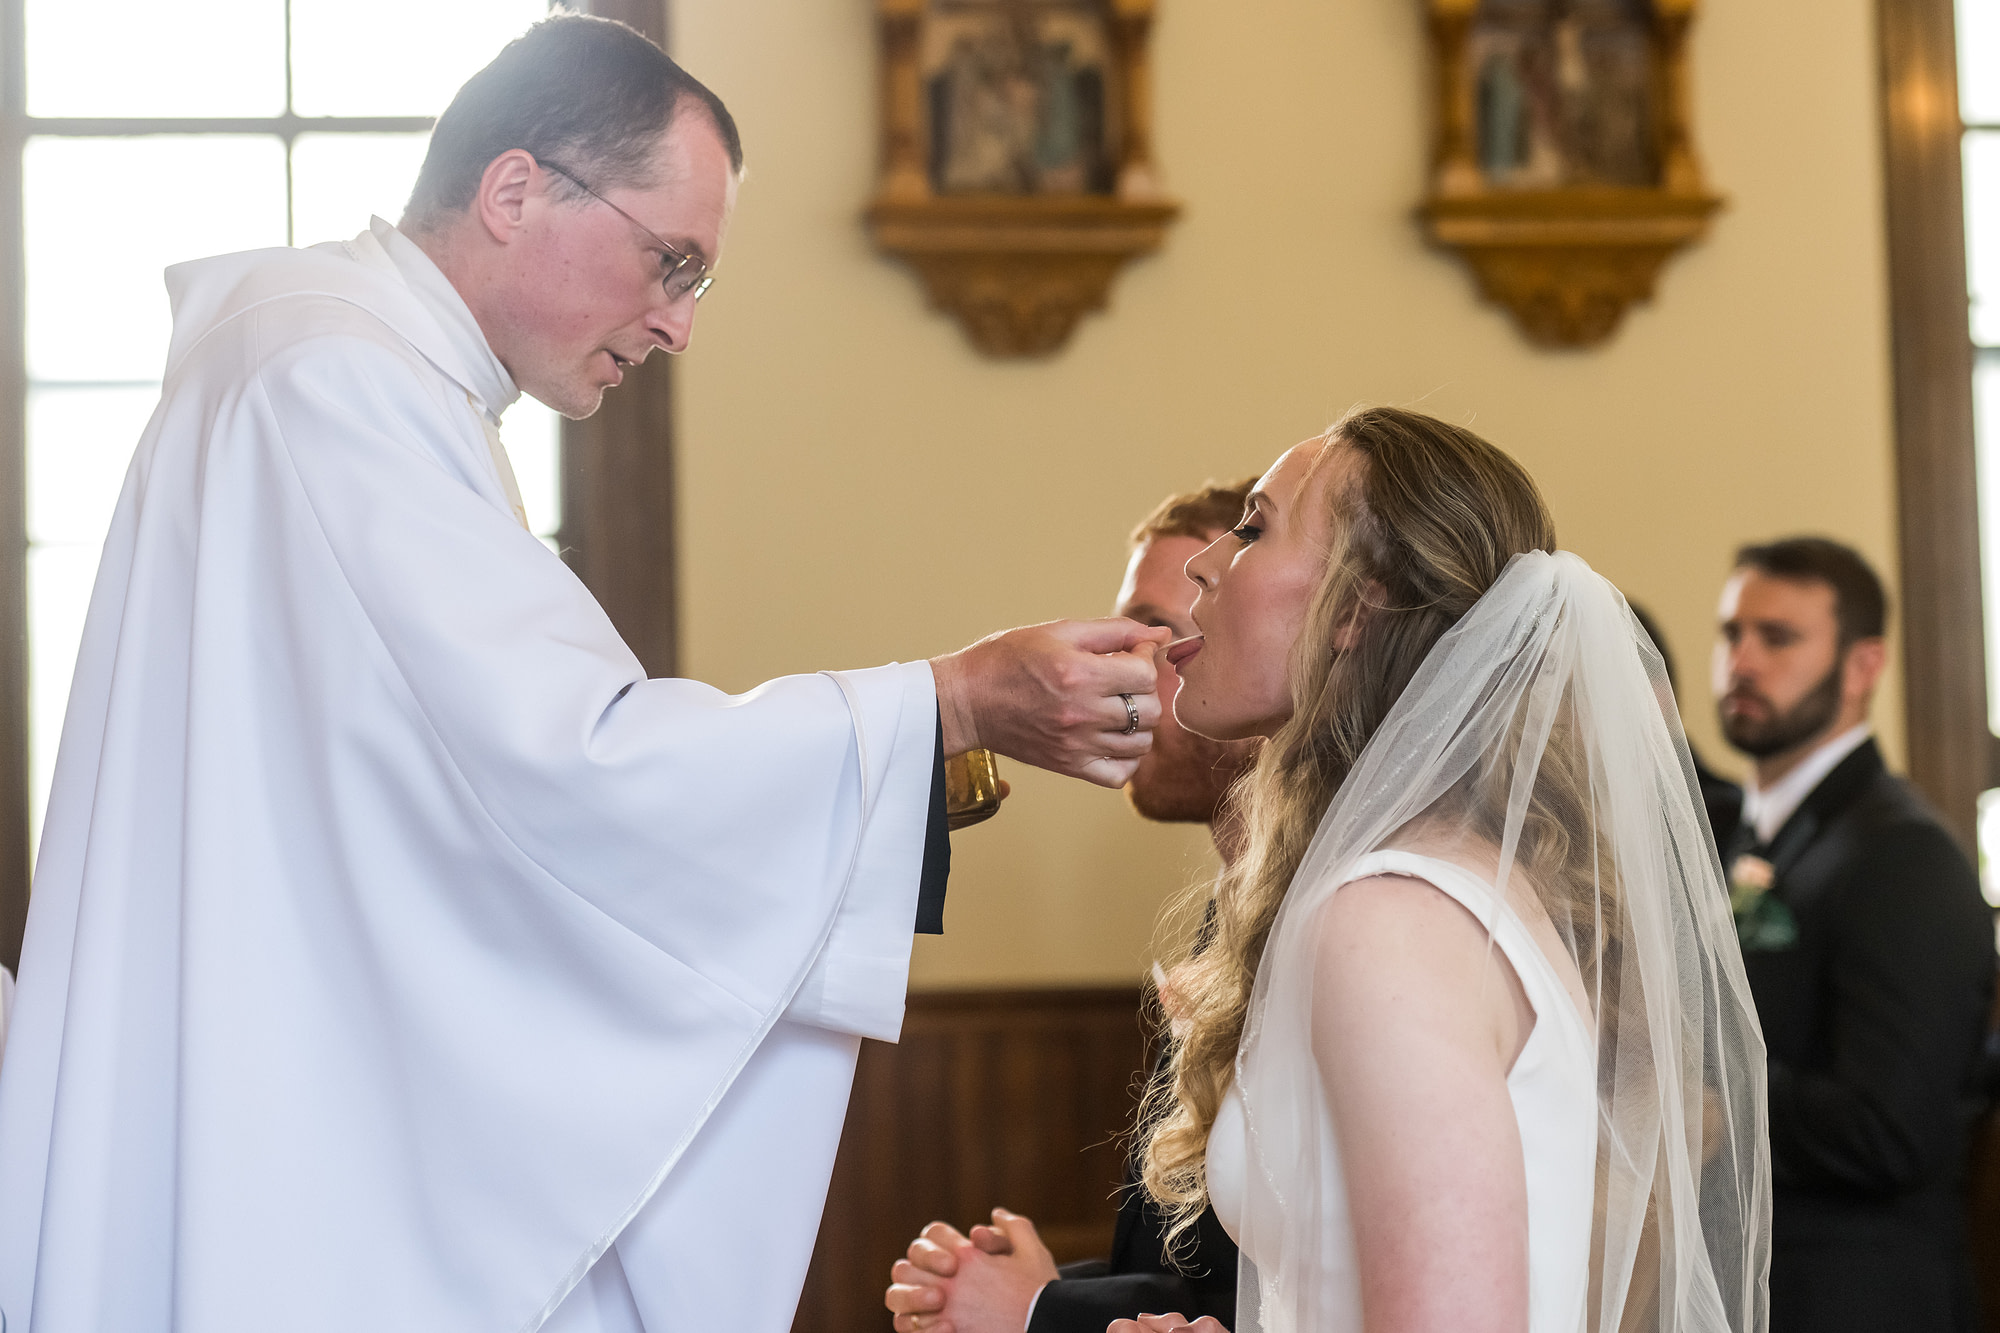 The bride eats a consecrated host during his wedding at St. Patrick's Church Telluride.